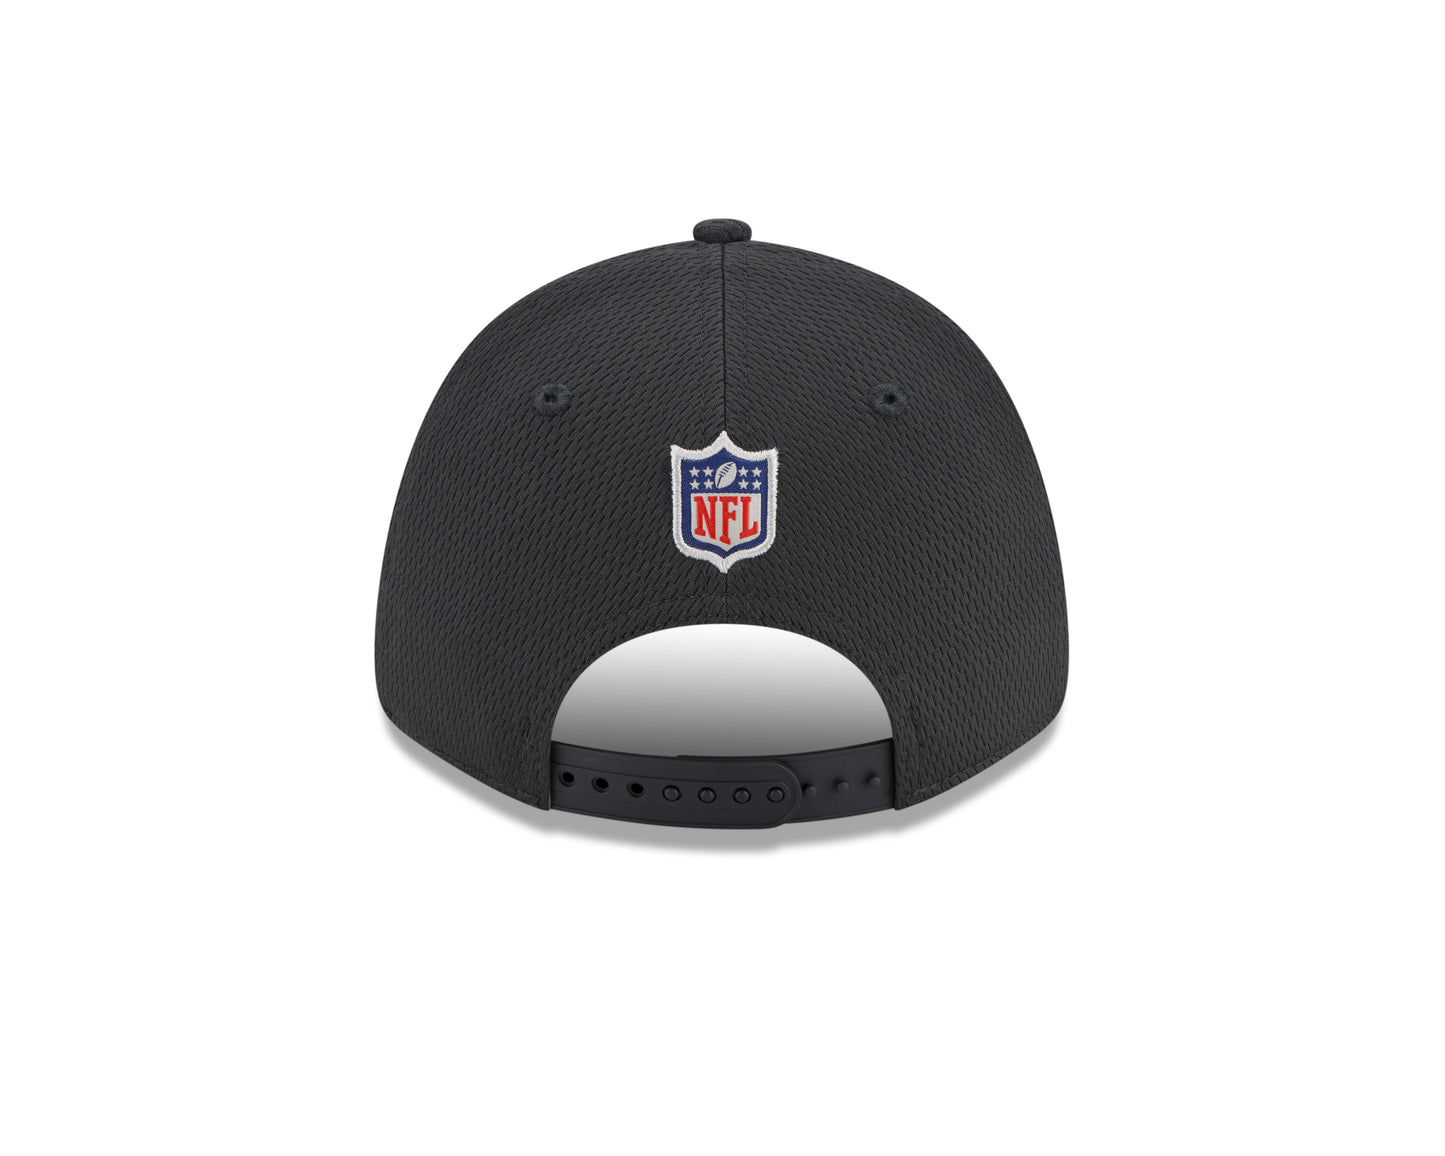 New York Giants New Era NFL Crucial Catch Official 9FORTY Adjustable Hat